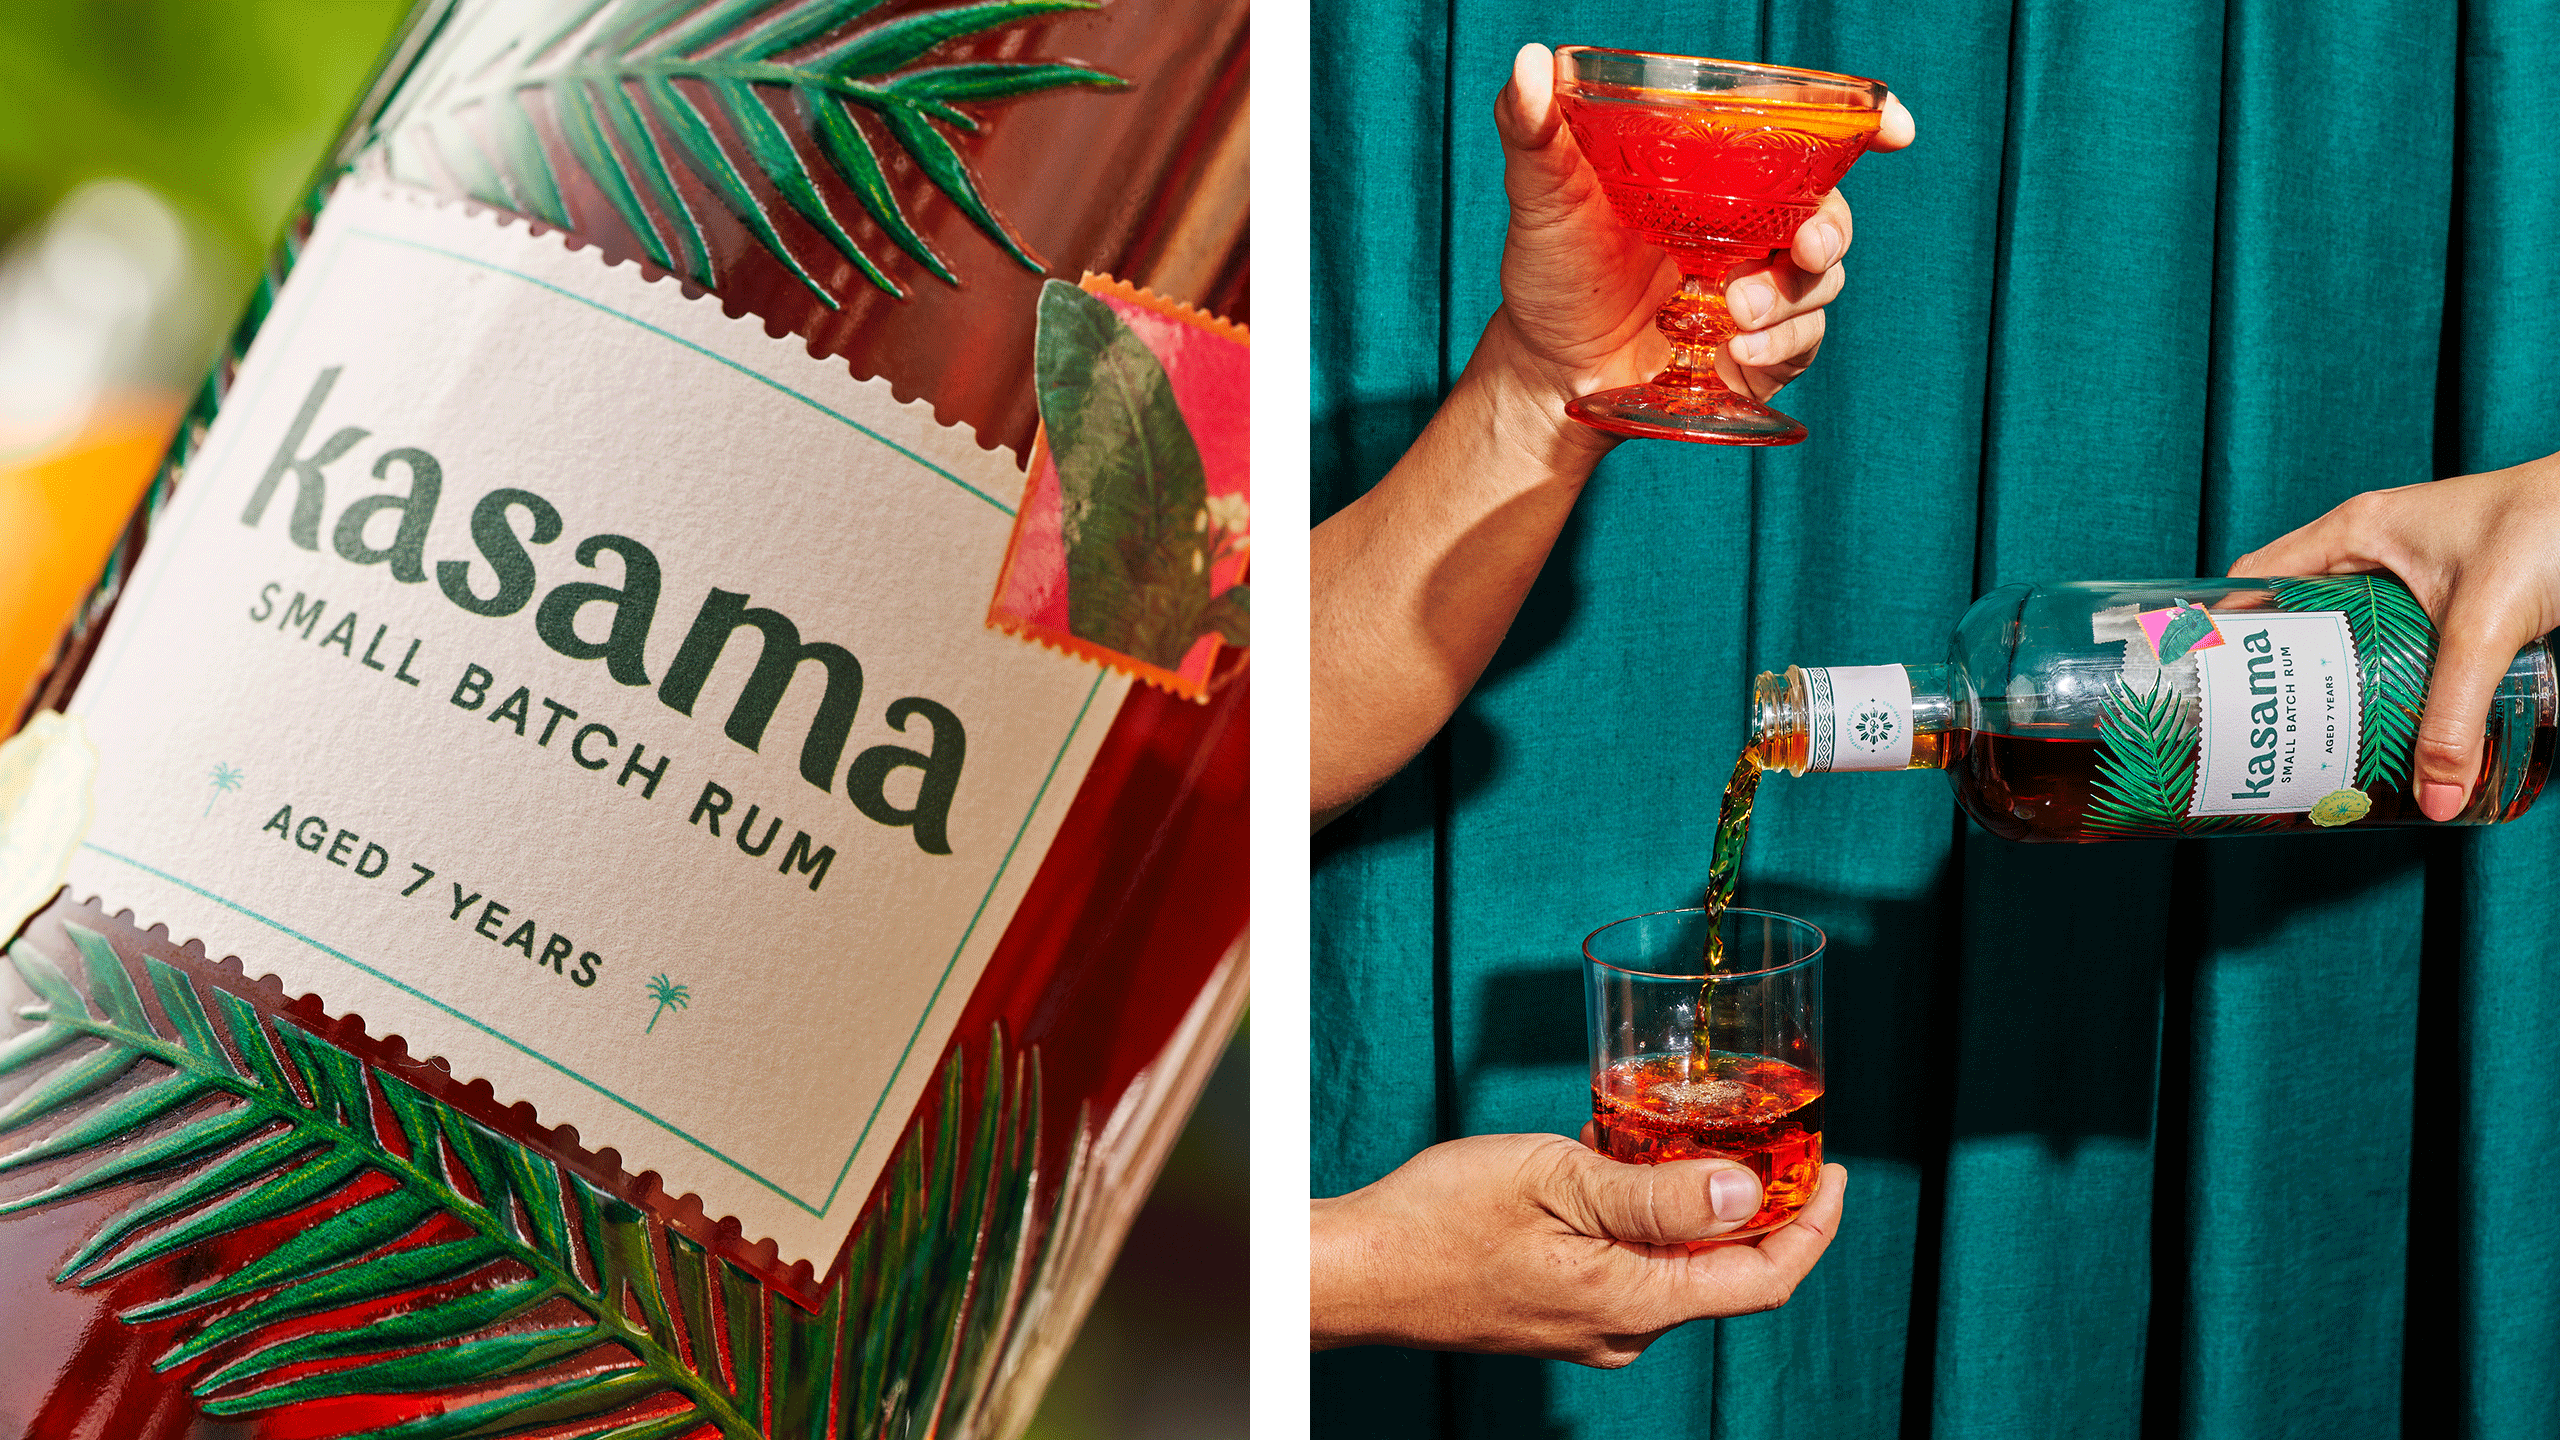 A close up of a Kasama Rum bottle and hands holding a cocktail a hand pouring Kasama Rum